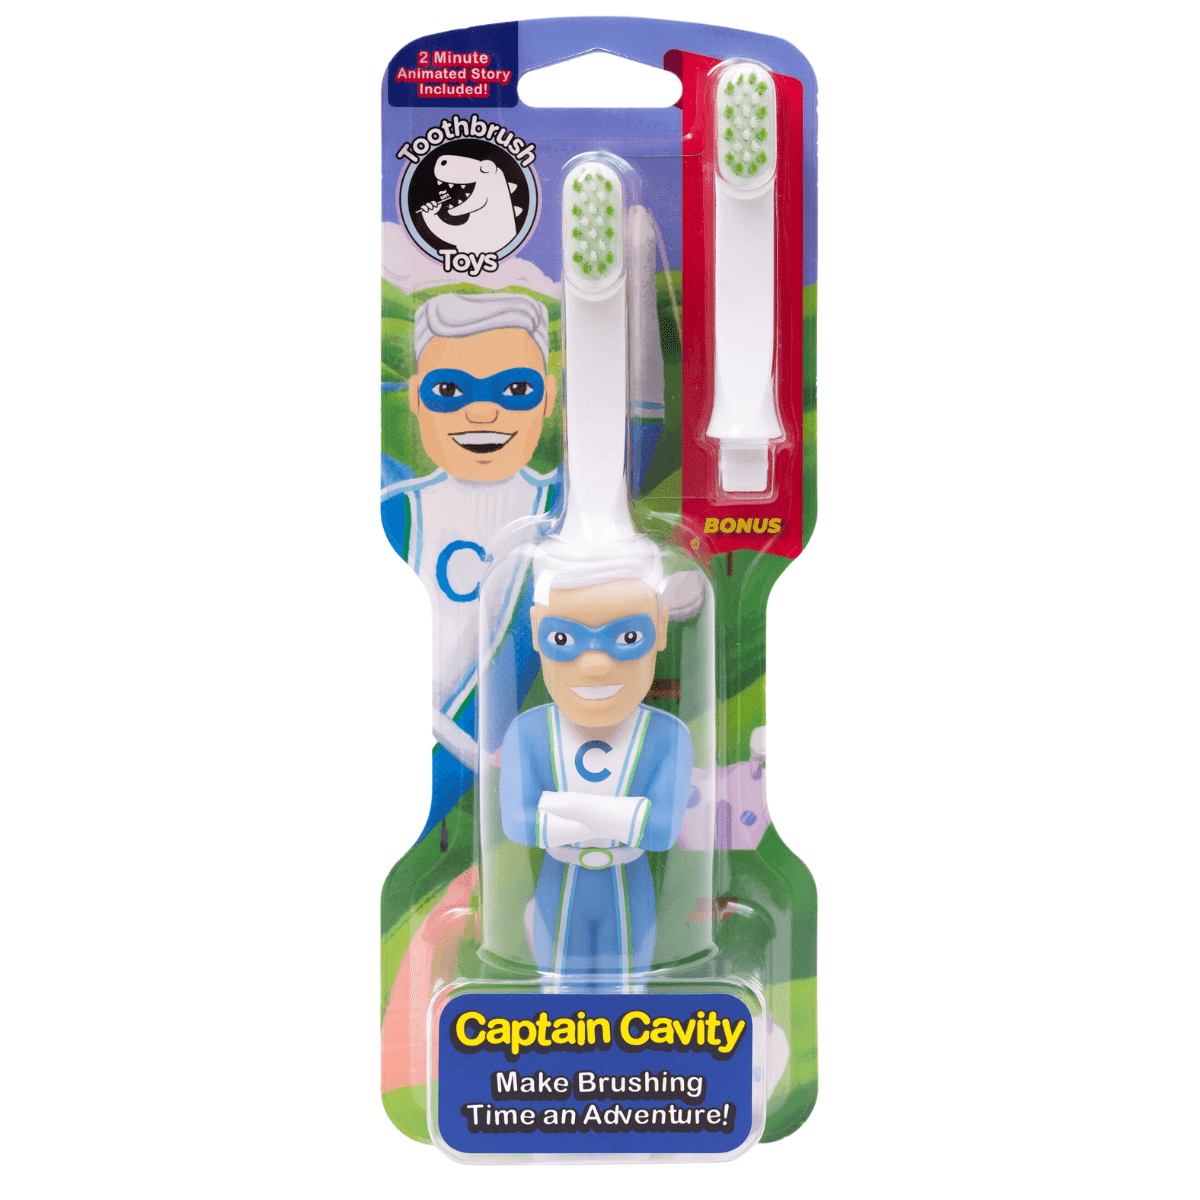 Captain Cavity toothbrush featuring a man in a blue outfit